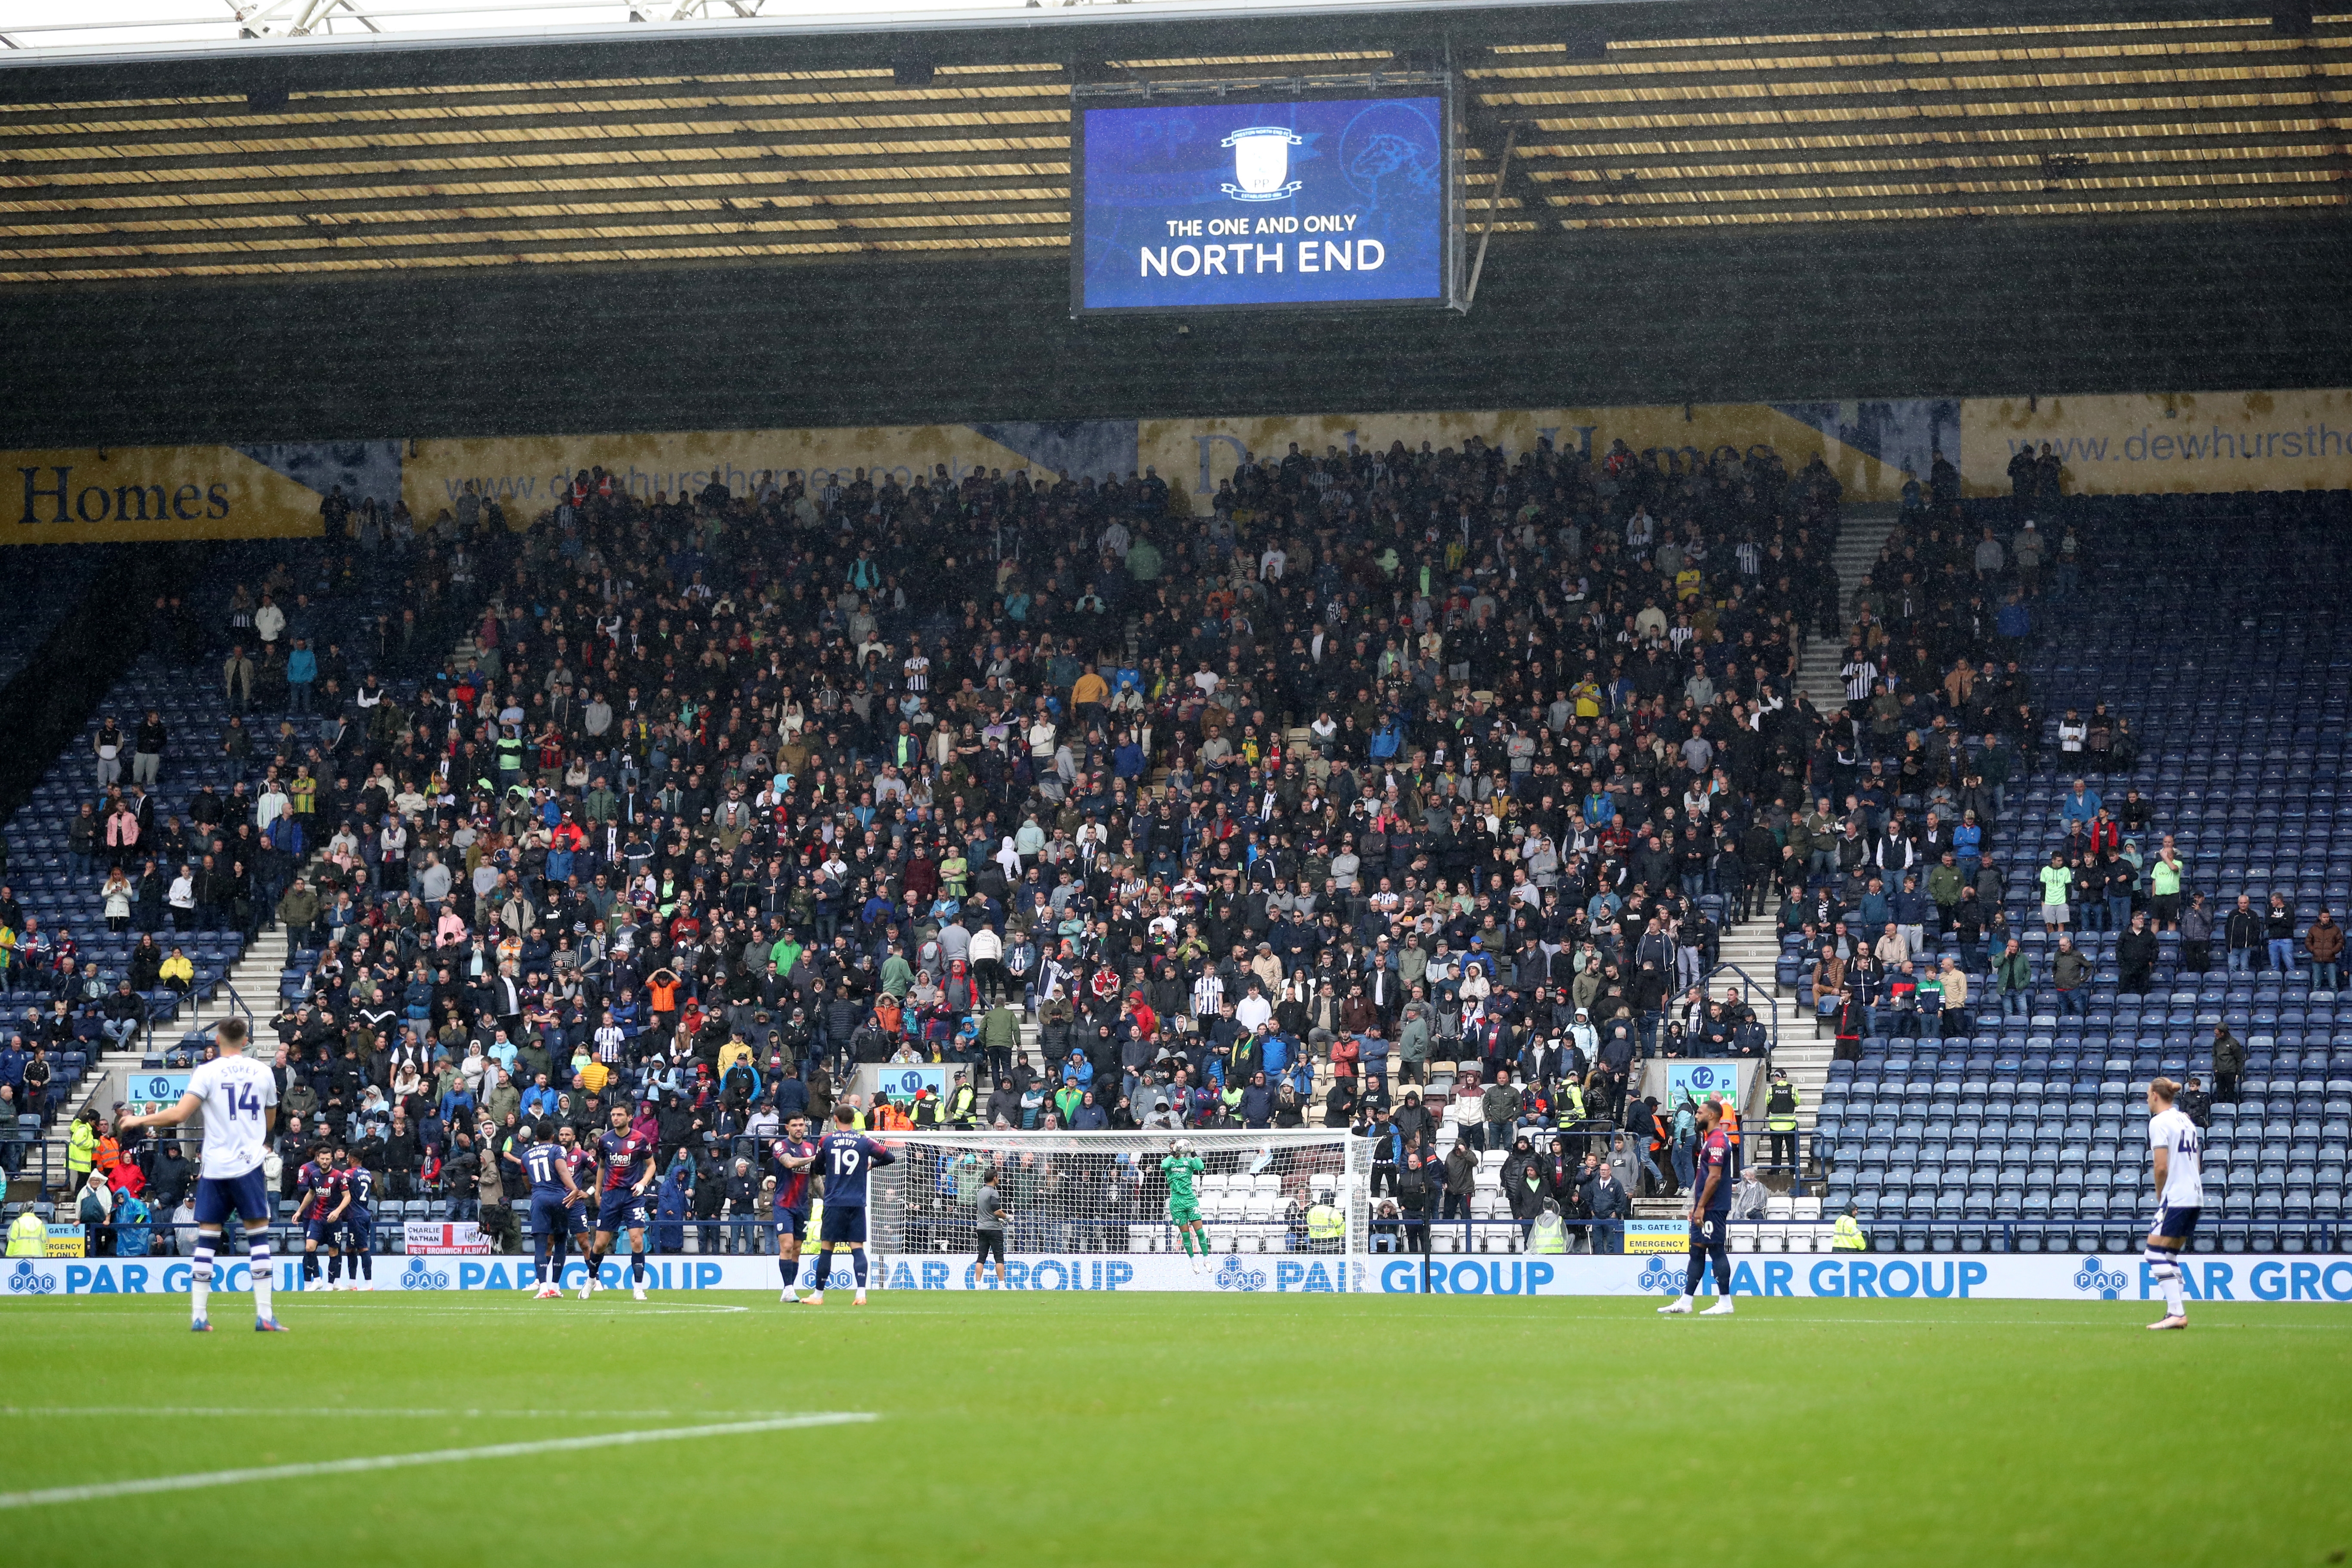 General view of Albion fans at Preston